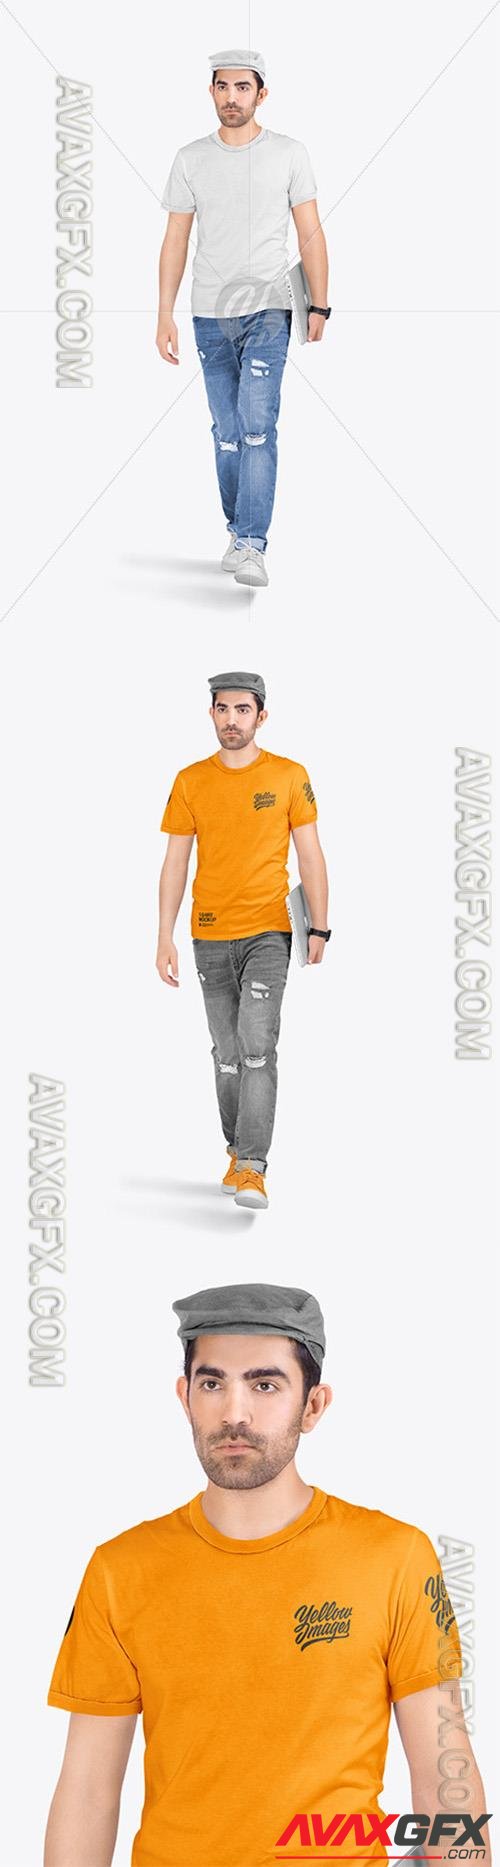 Man in Ringer T-Shirt and Jeans 73738